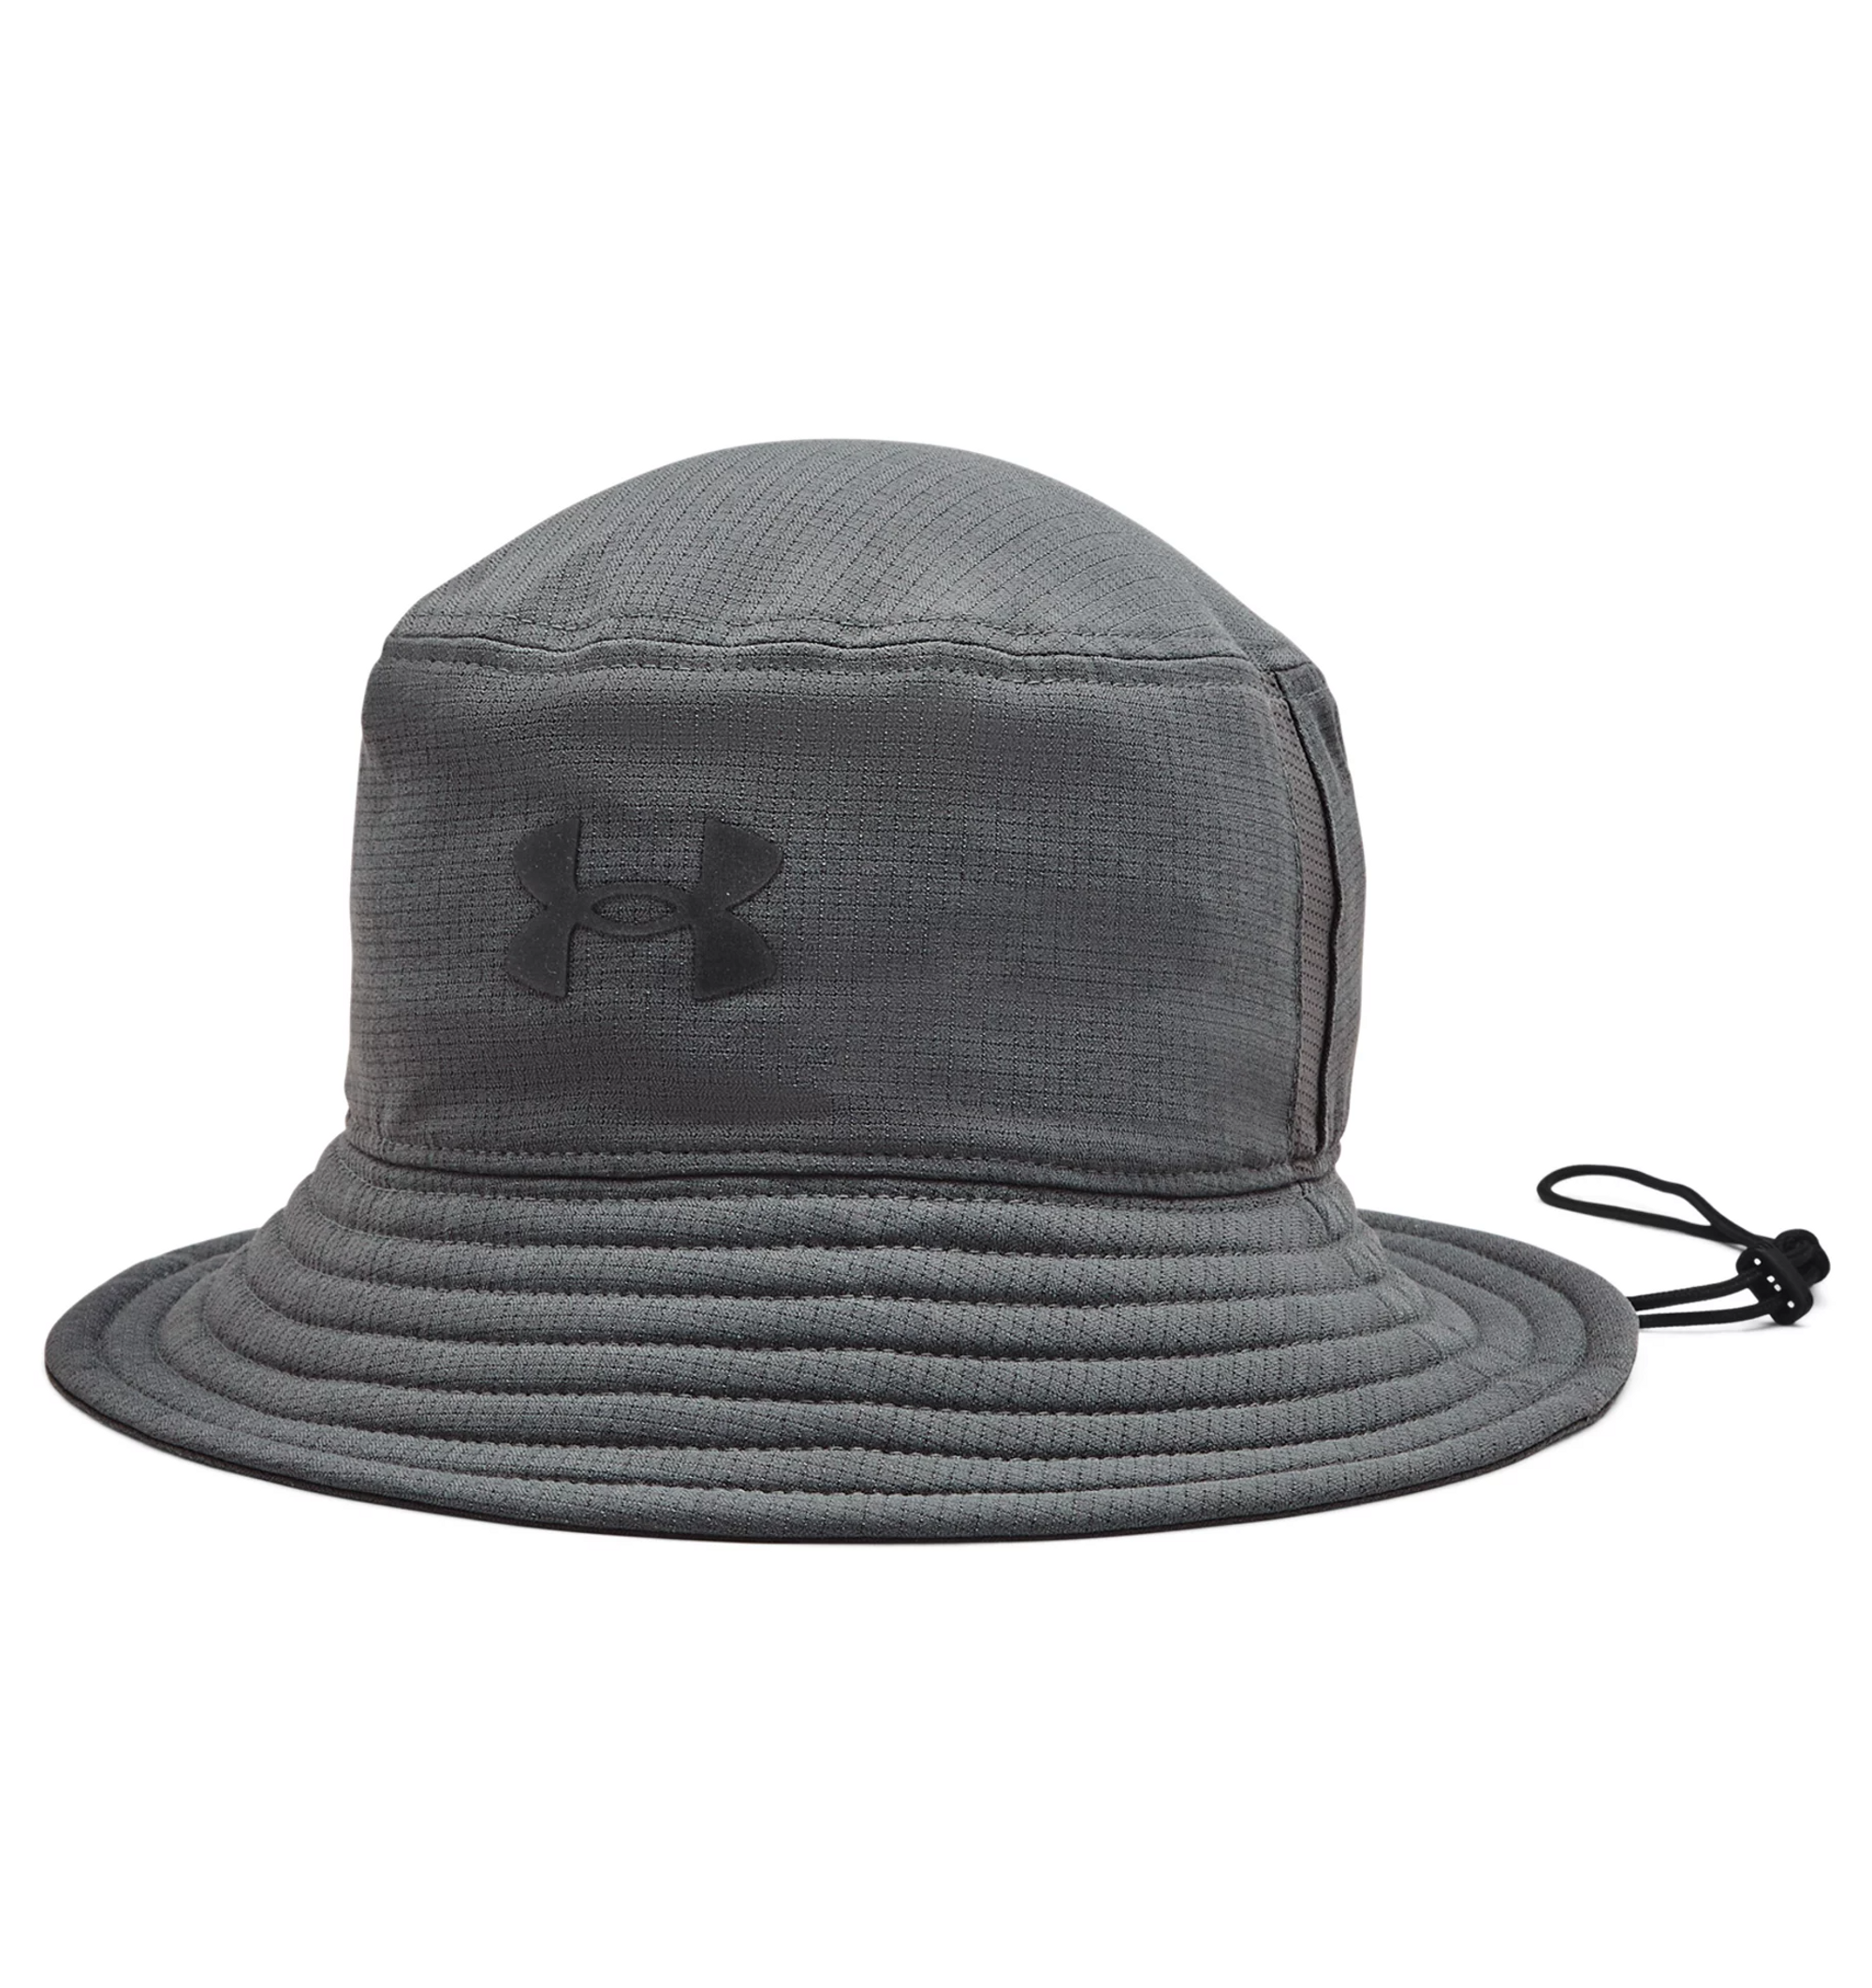 Ua Iso-chill Armourvent Bucket Hat - KR1361527012L-XL